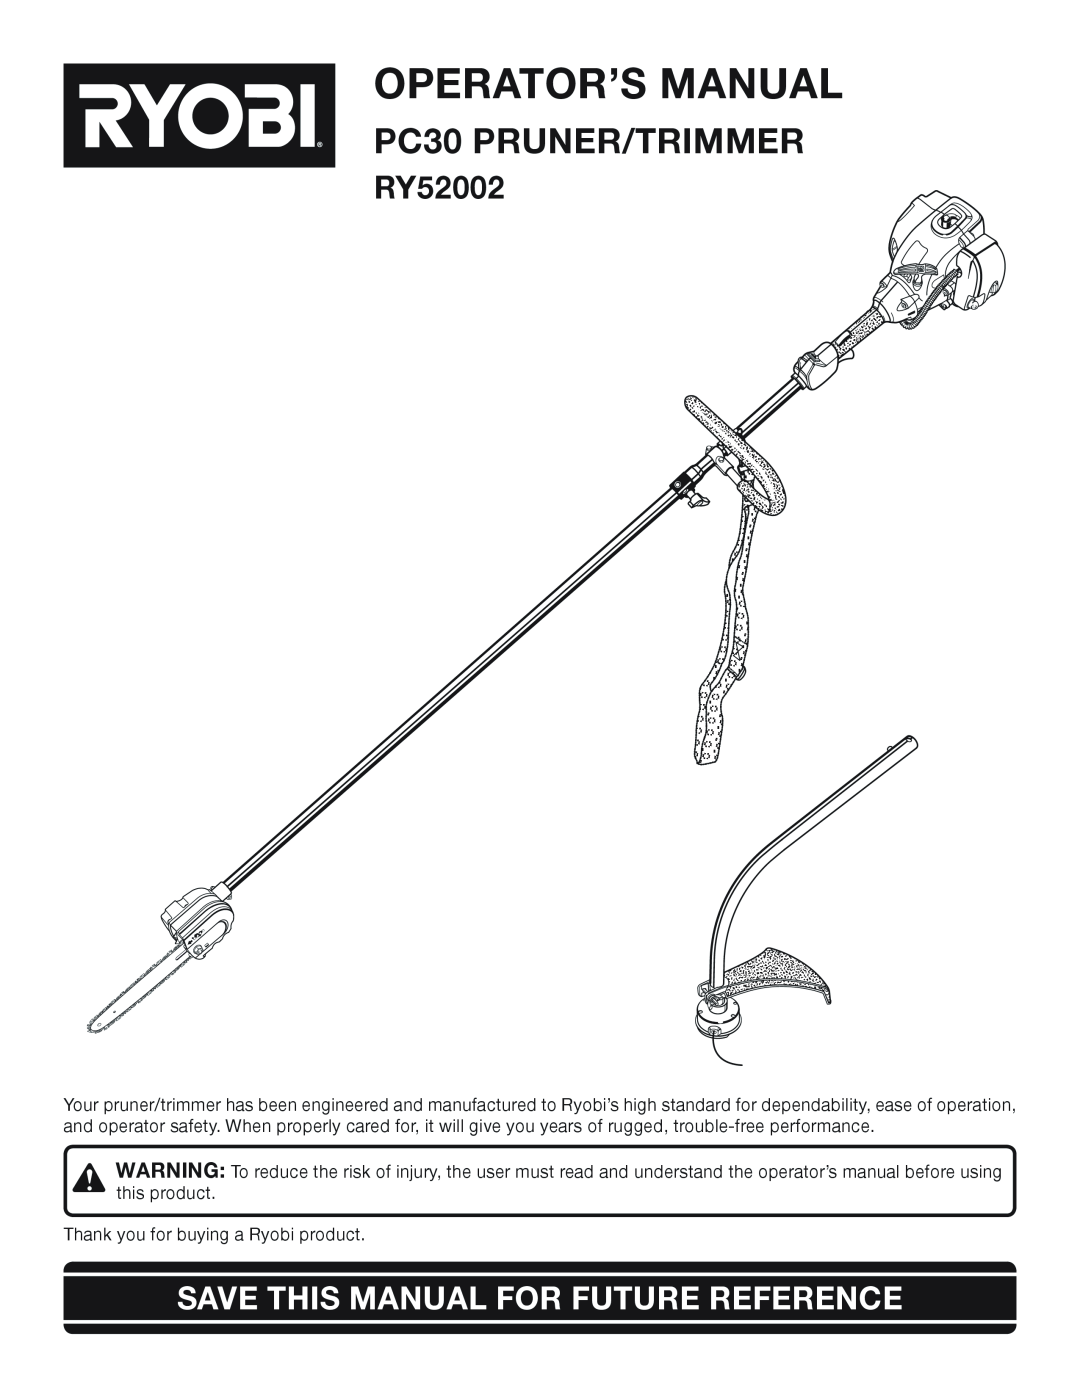 Ryobi Outdoor RY52002 manual Operator’S Manual, PC30 PRUNER/TRIMMER, Save This Manual For Future Reference 